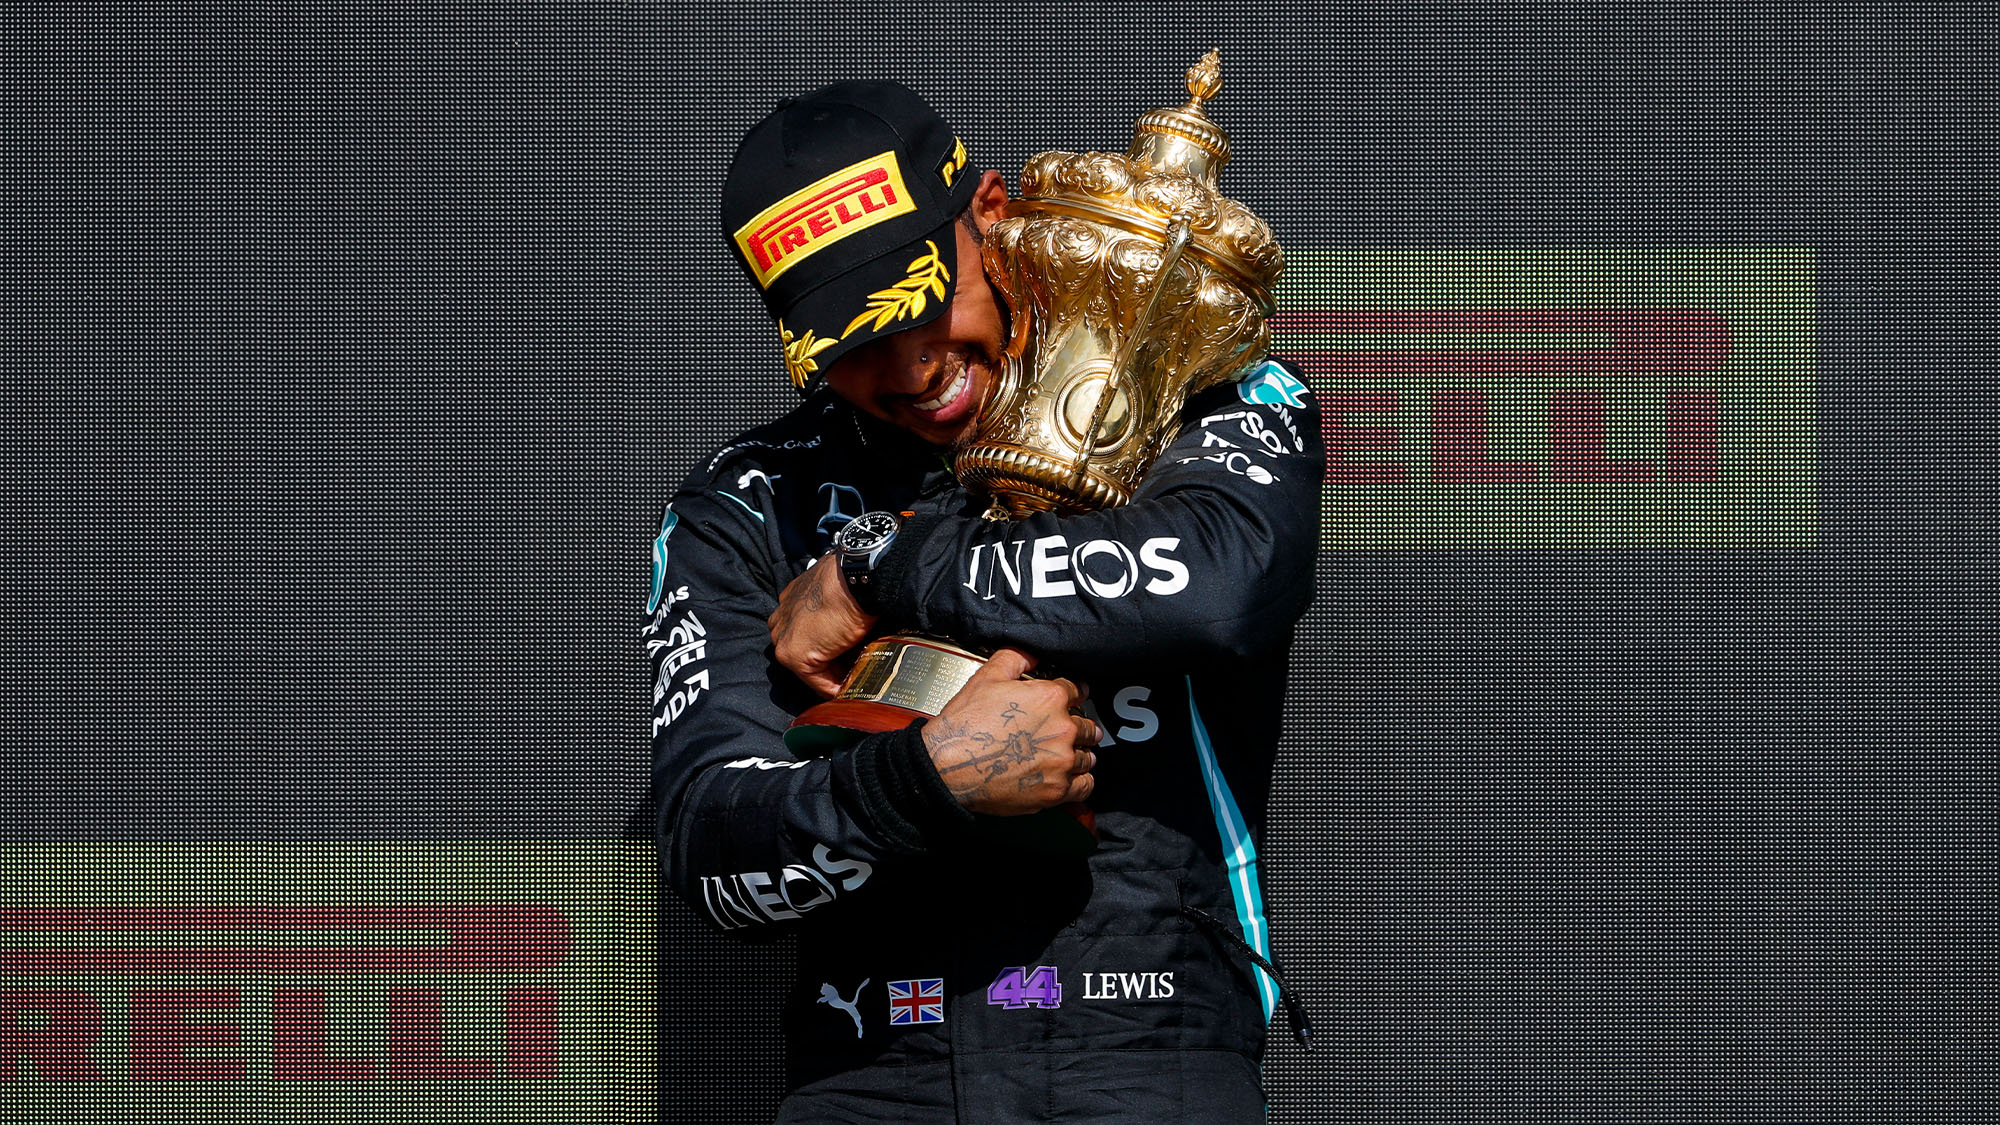 Winner Mercedes' British driver Lewis Hamilton with the trophy on the  News Photo - Getty Images